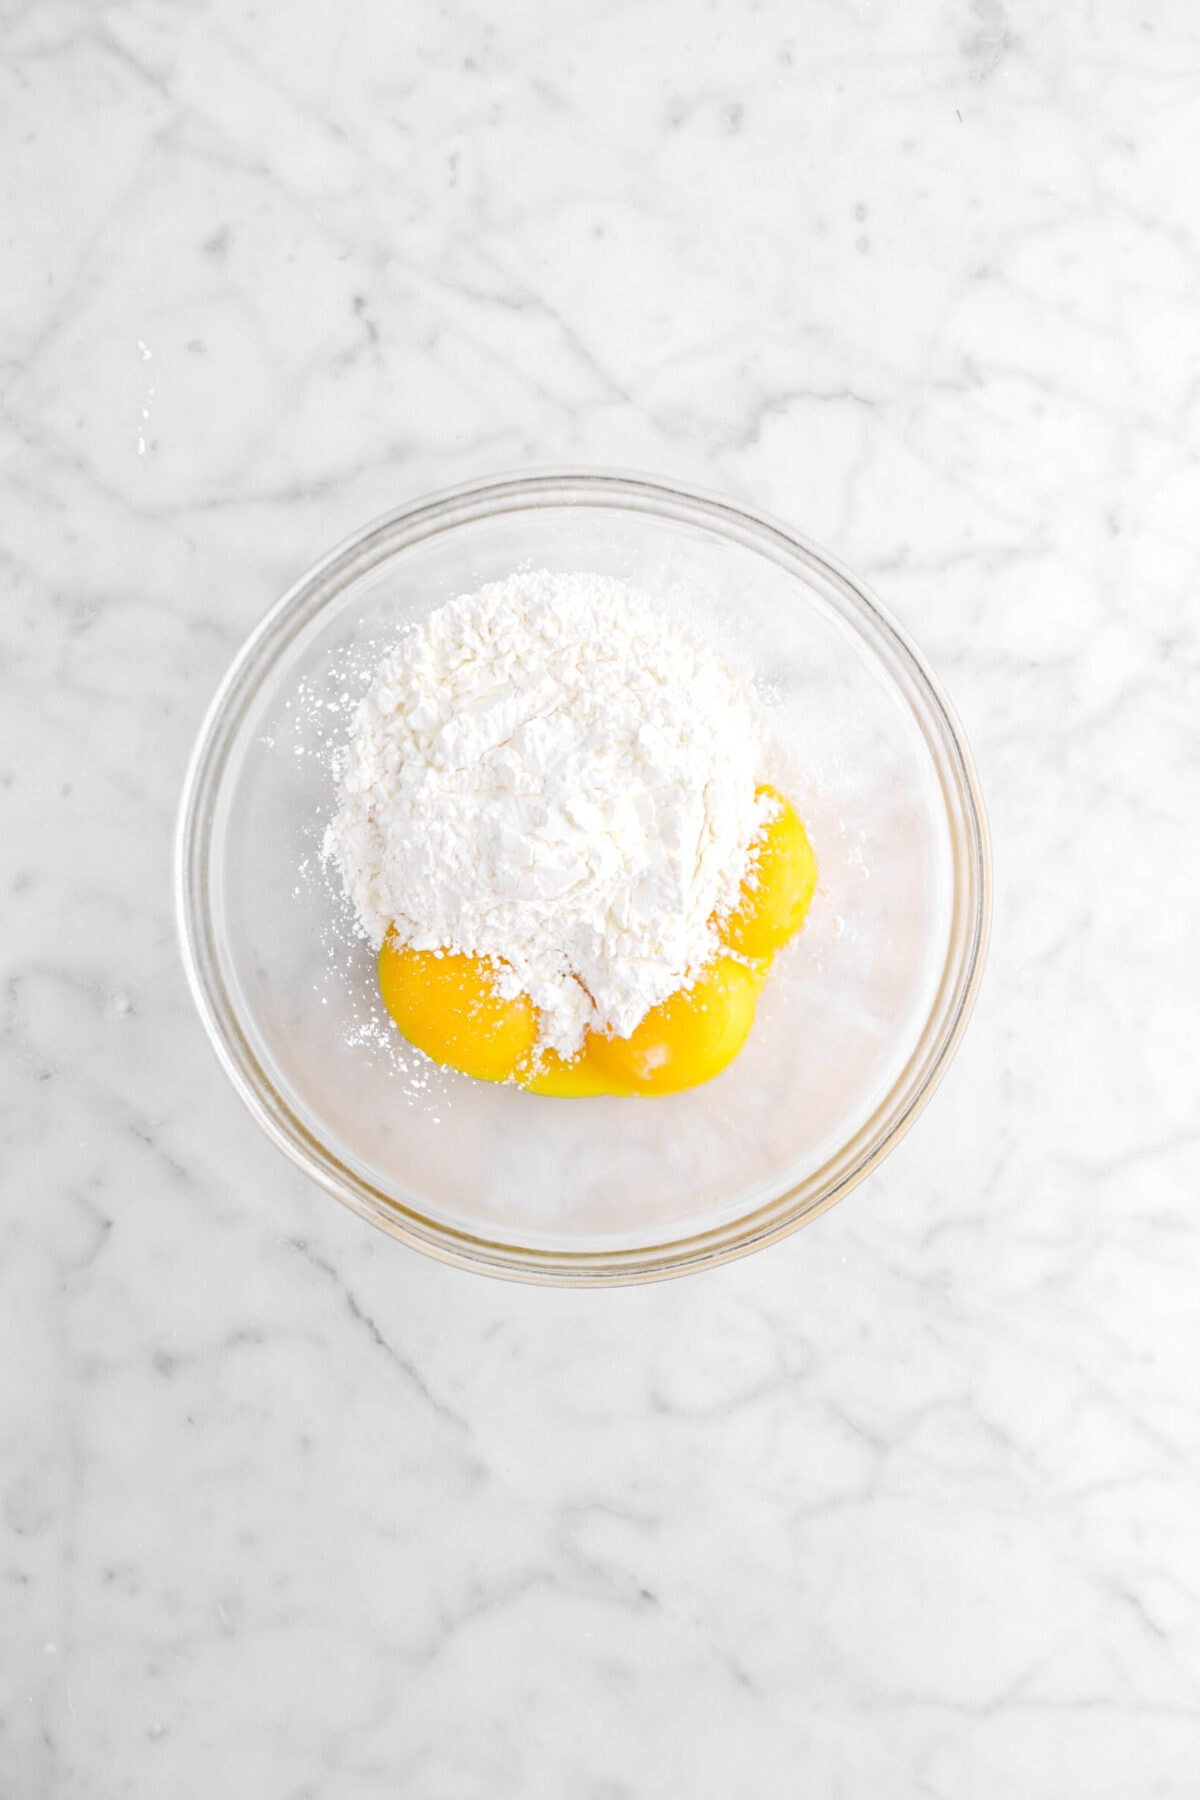 corn starch and egg yolks in glass bowl